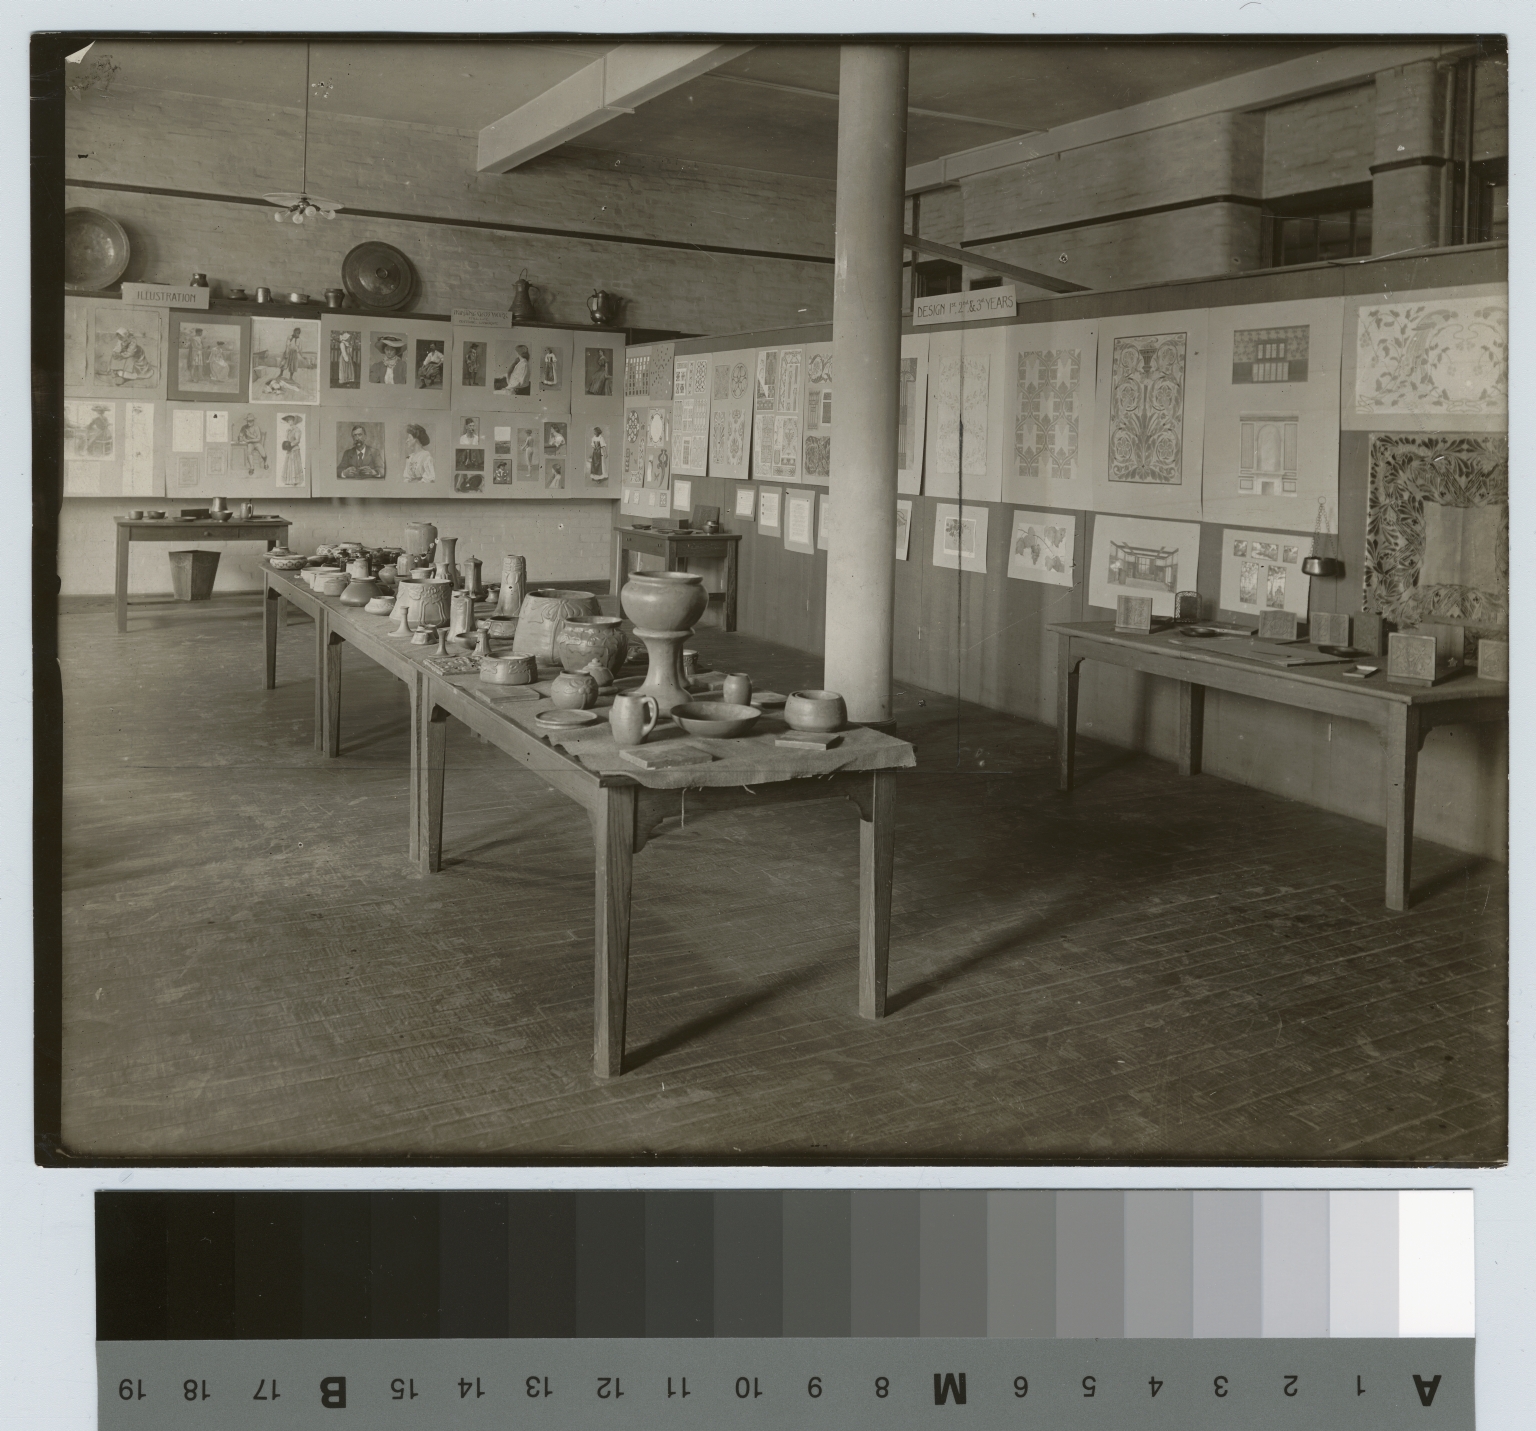 Academics, art and design, interior view of an exhibition of student work, [1900-1920]